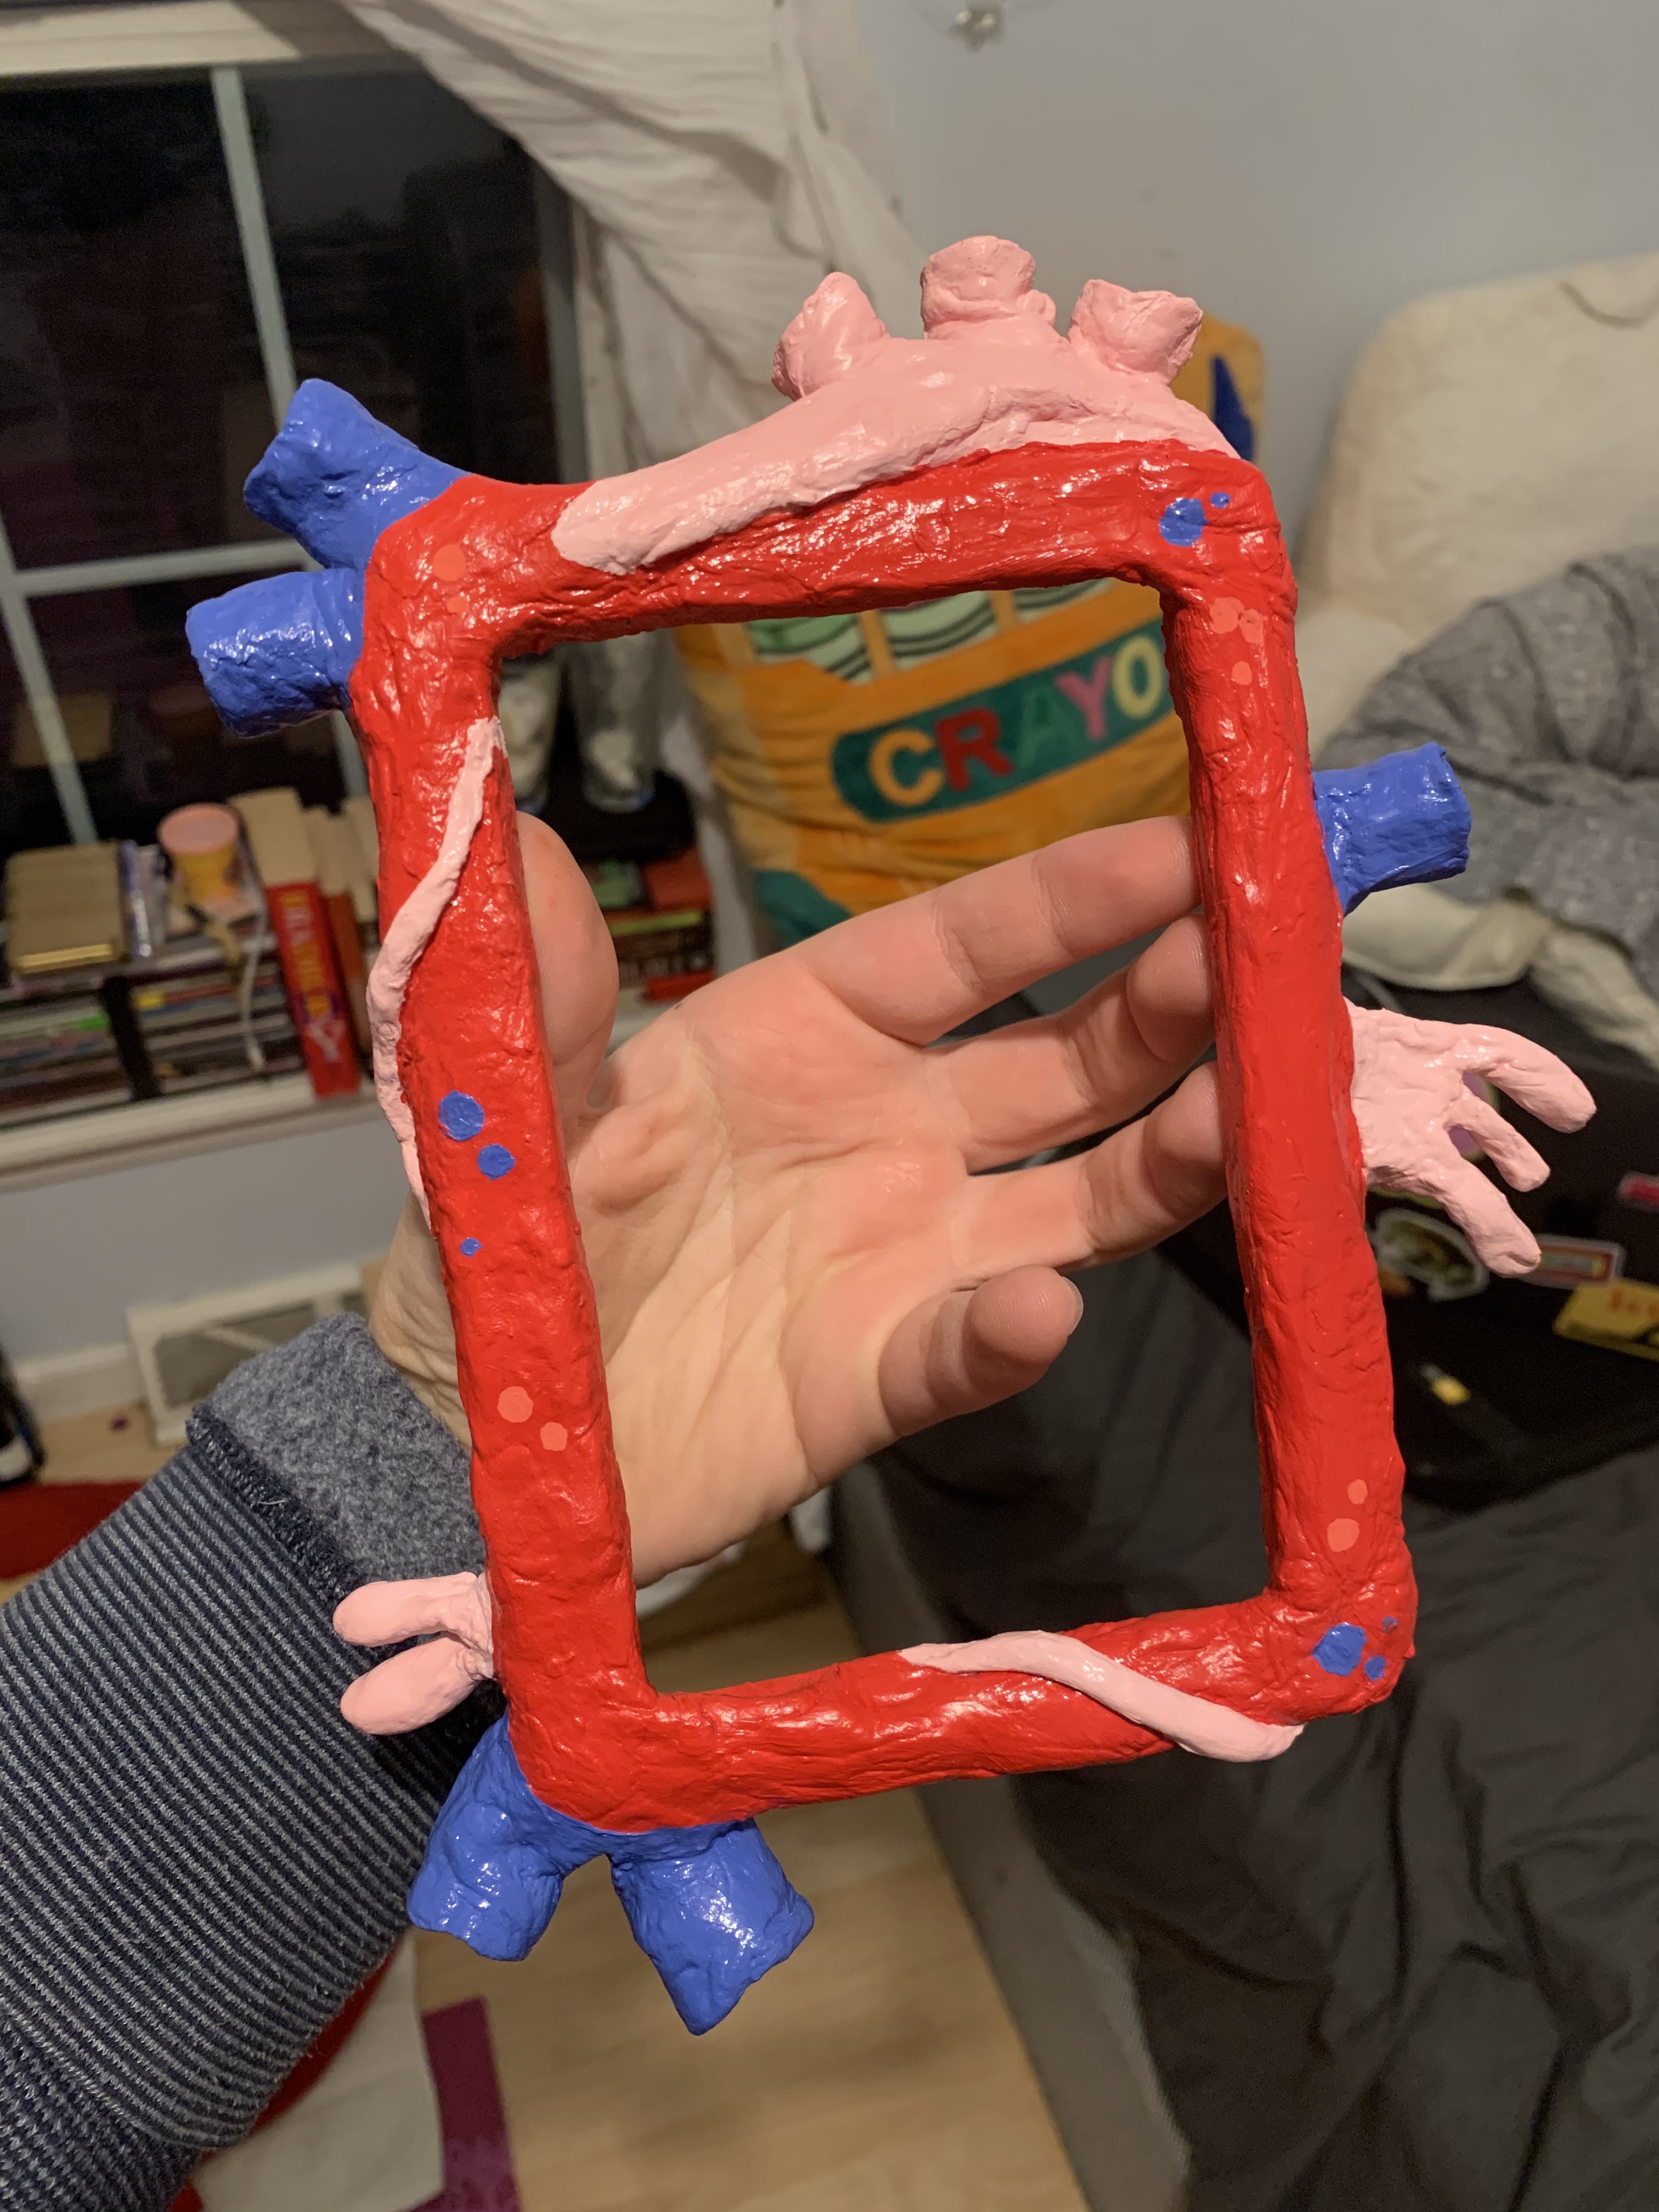 air-dry clay sculpture molded around a picture frame. It’s meant to resemble a human heart, with multiple tubes and organic shapes sculpted around the frame. This version is painted red, and the tubes/ organic shapes painted blue and pink. It’s also varnished, so it has an overall glossy look. 